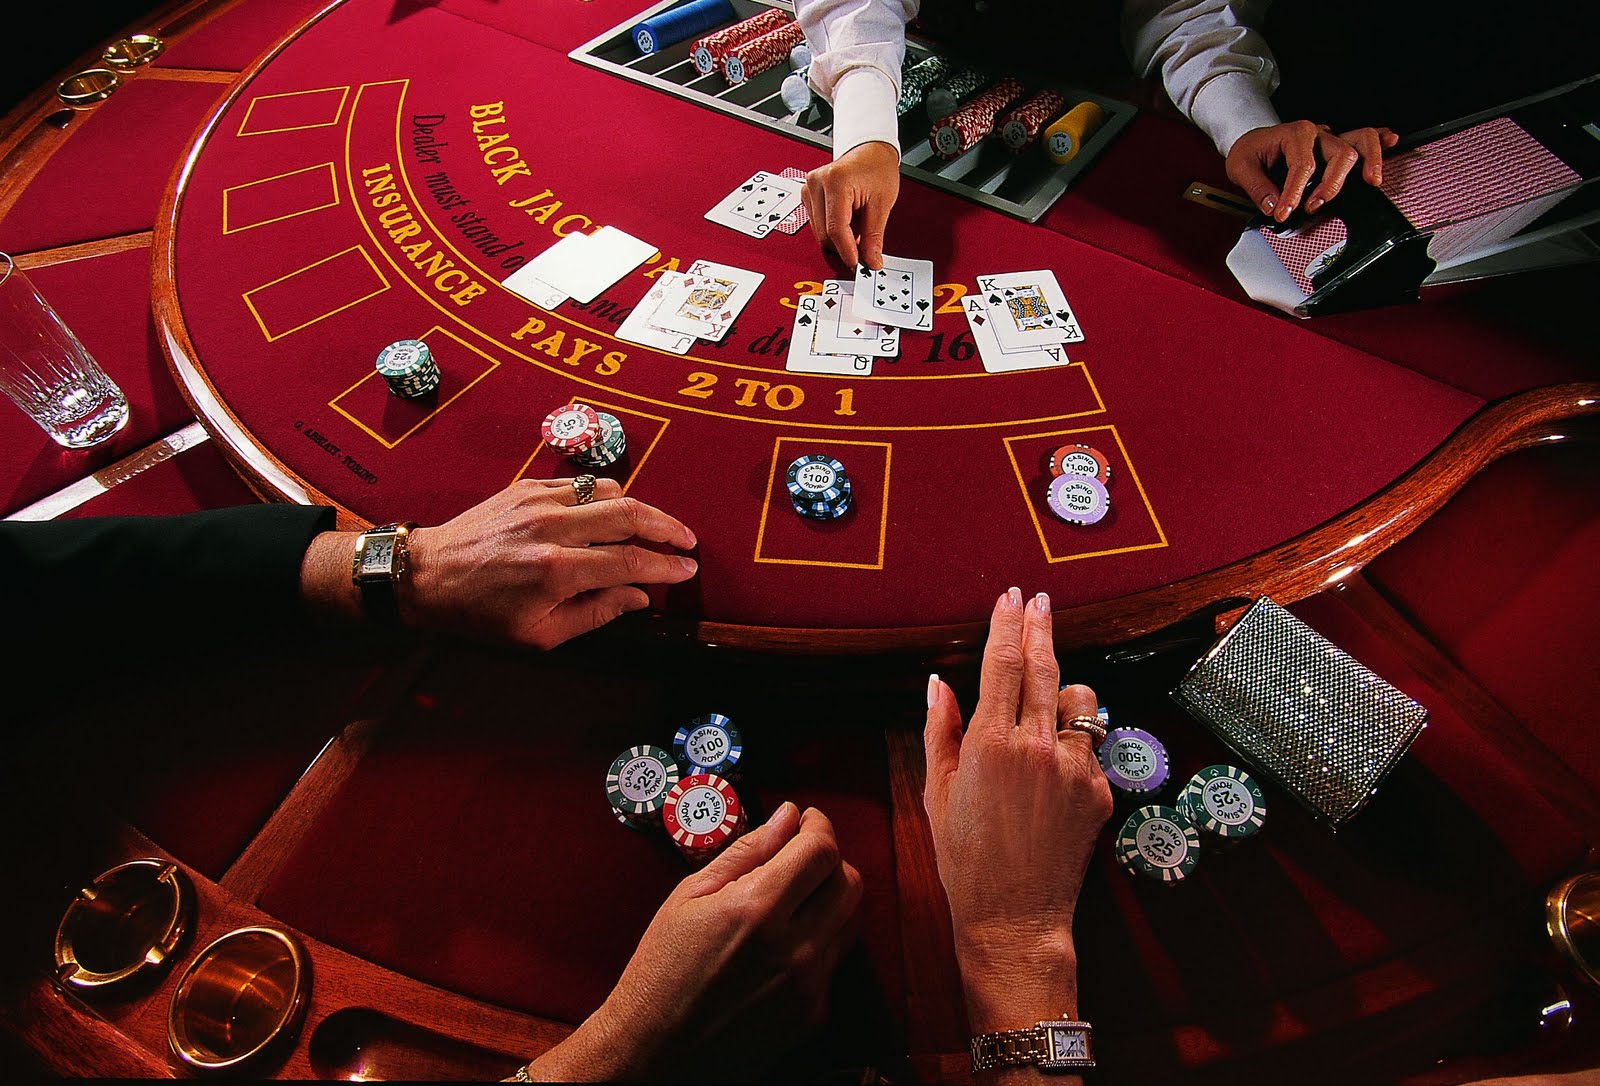 How Does Poker Game Impact Decision Making In Real Life